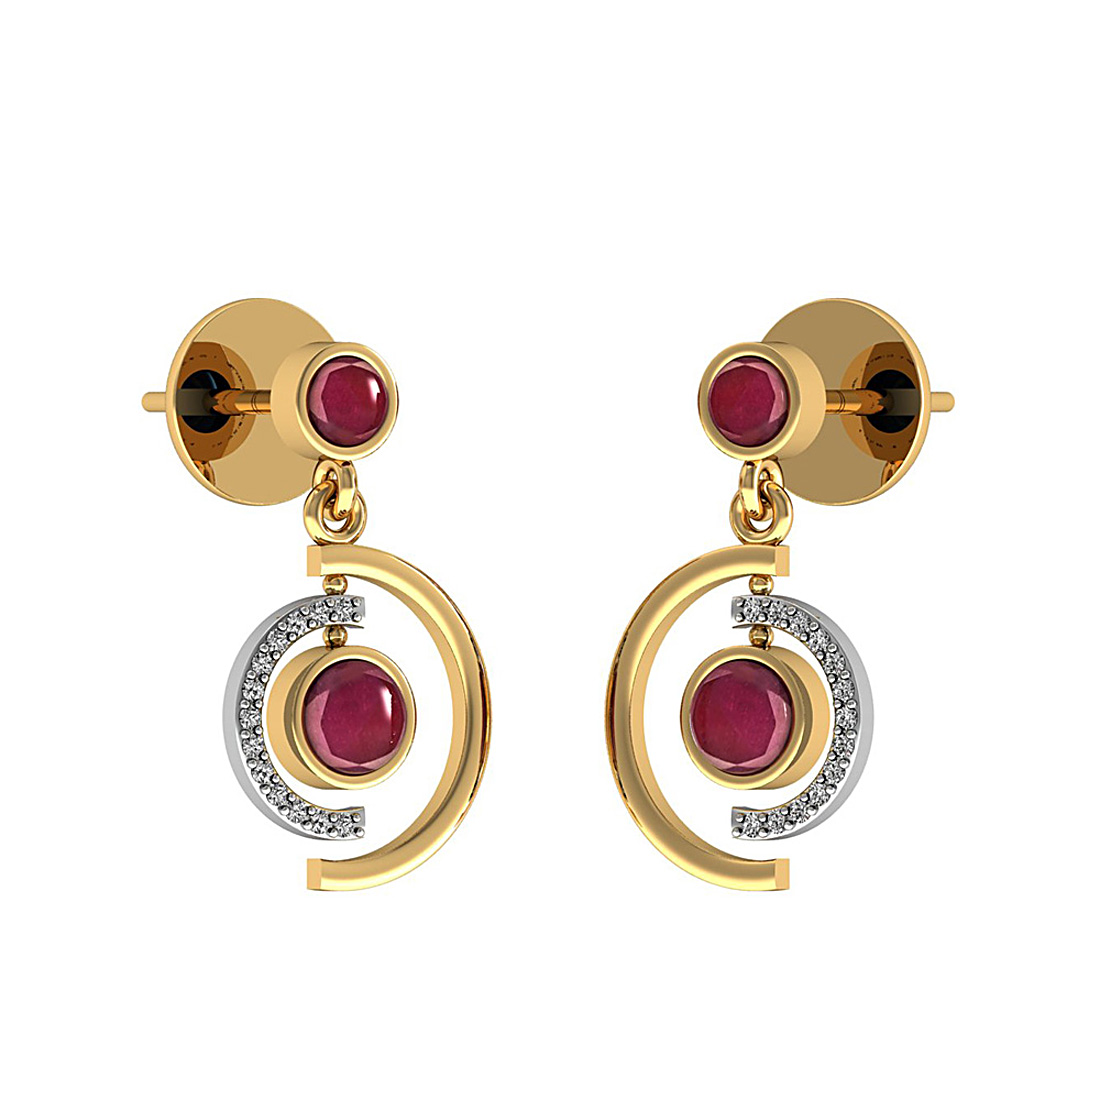 Genuine diamond stud earrings made in 18k solid gold with ruby